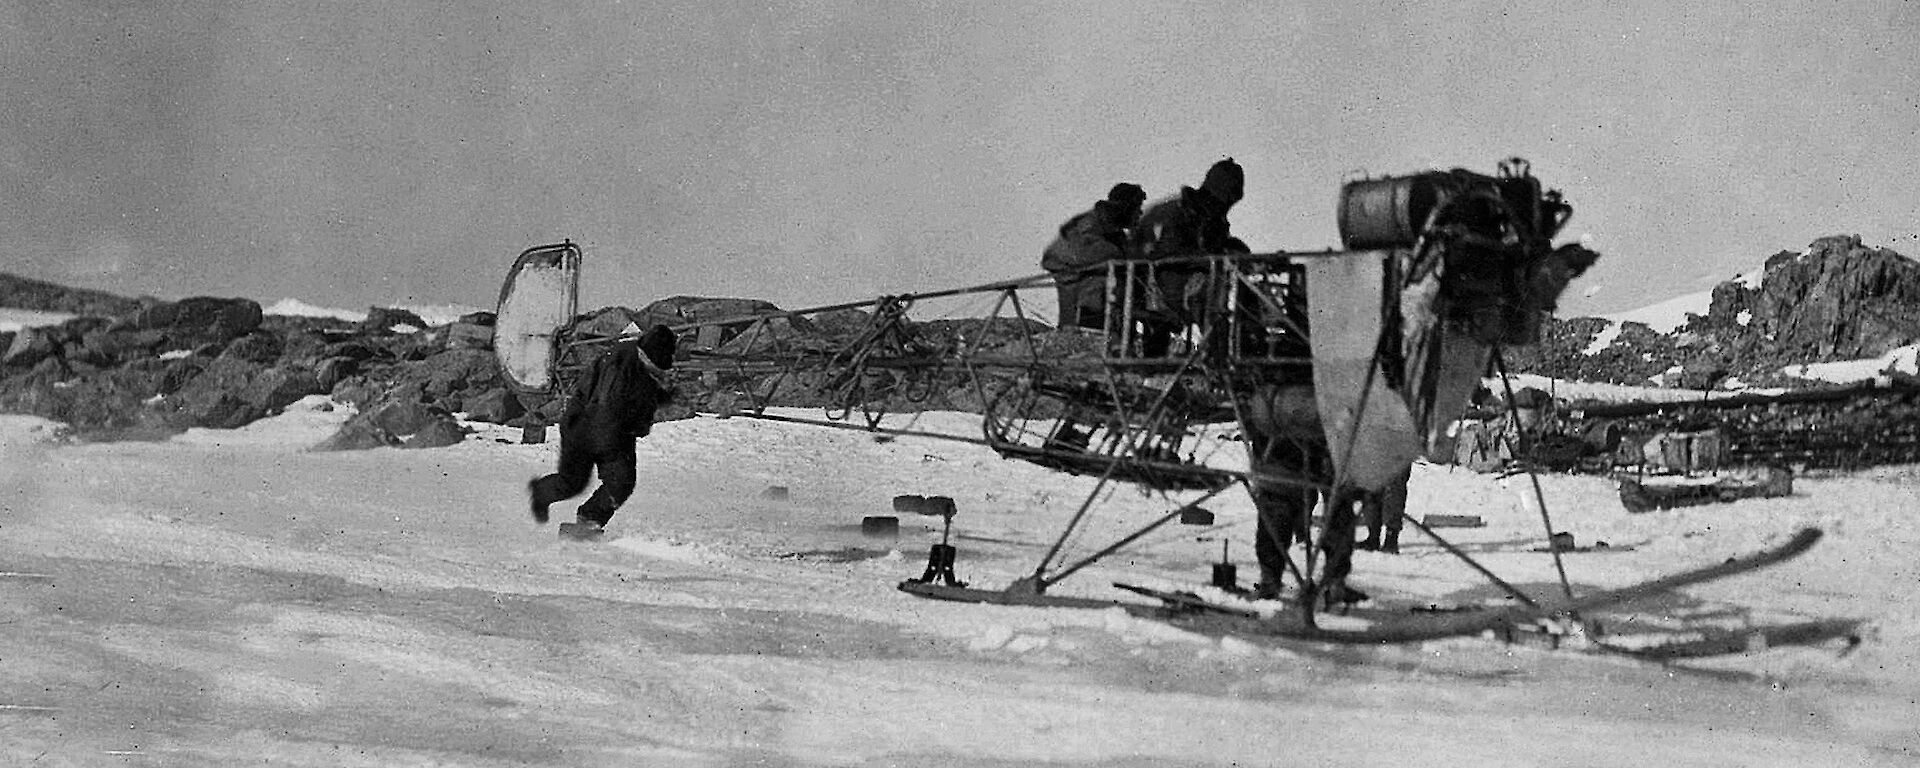 The air tractor in Antarctica during the Australasian Antarctic Expedition.